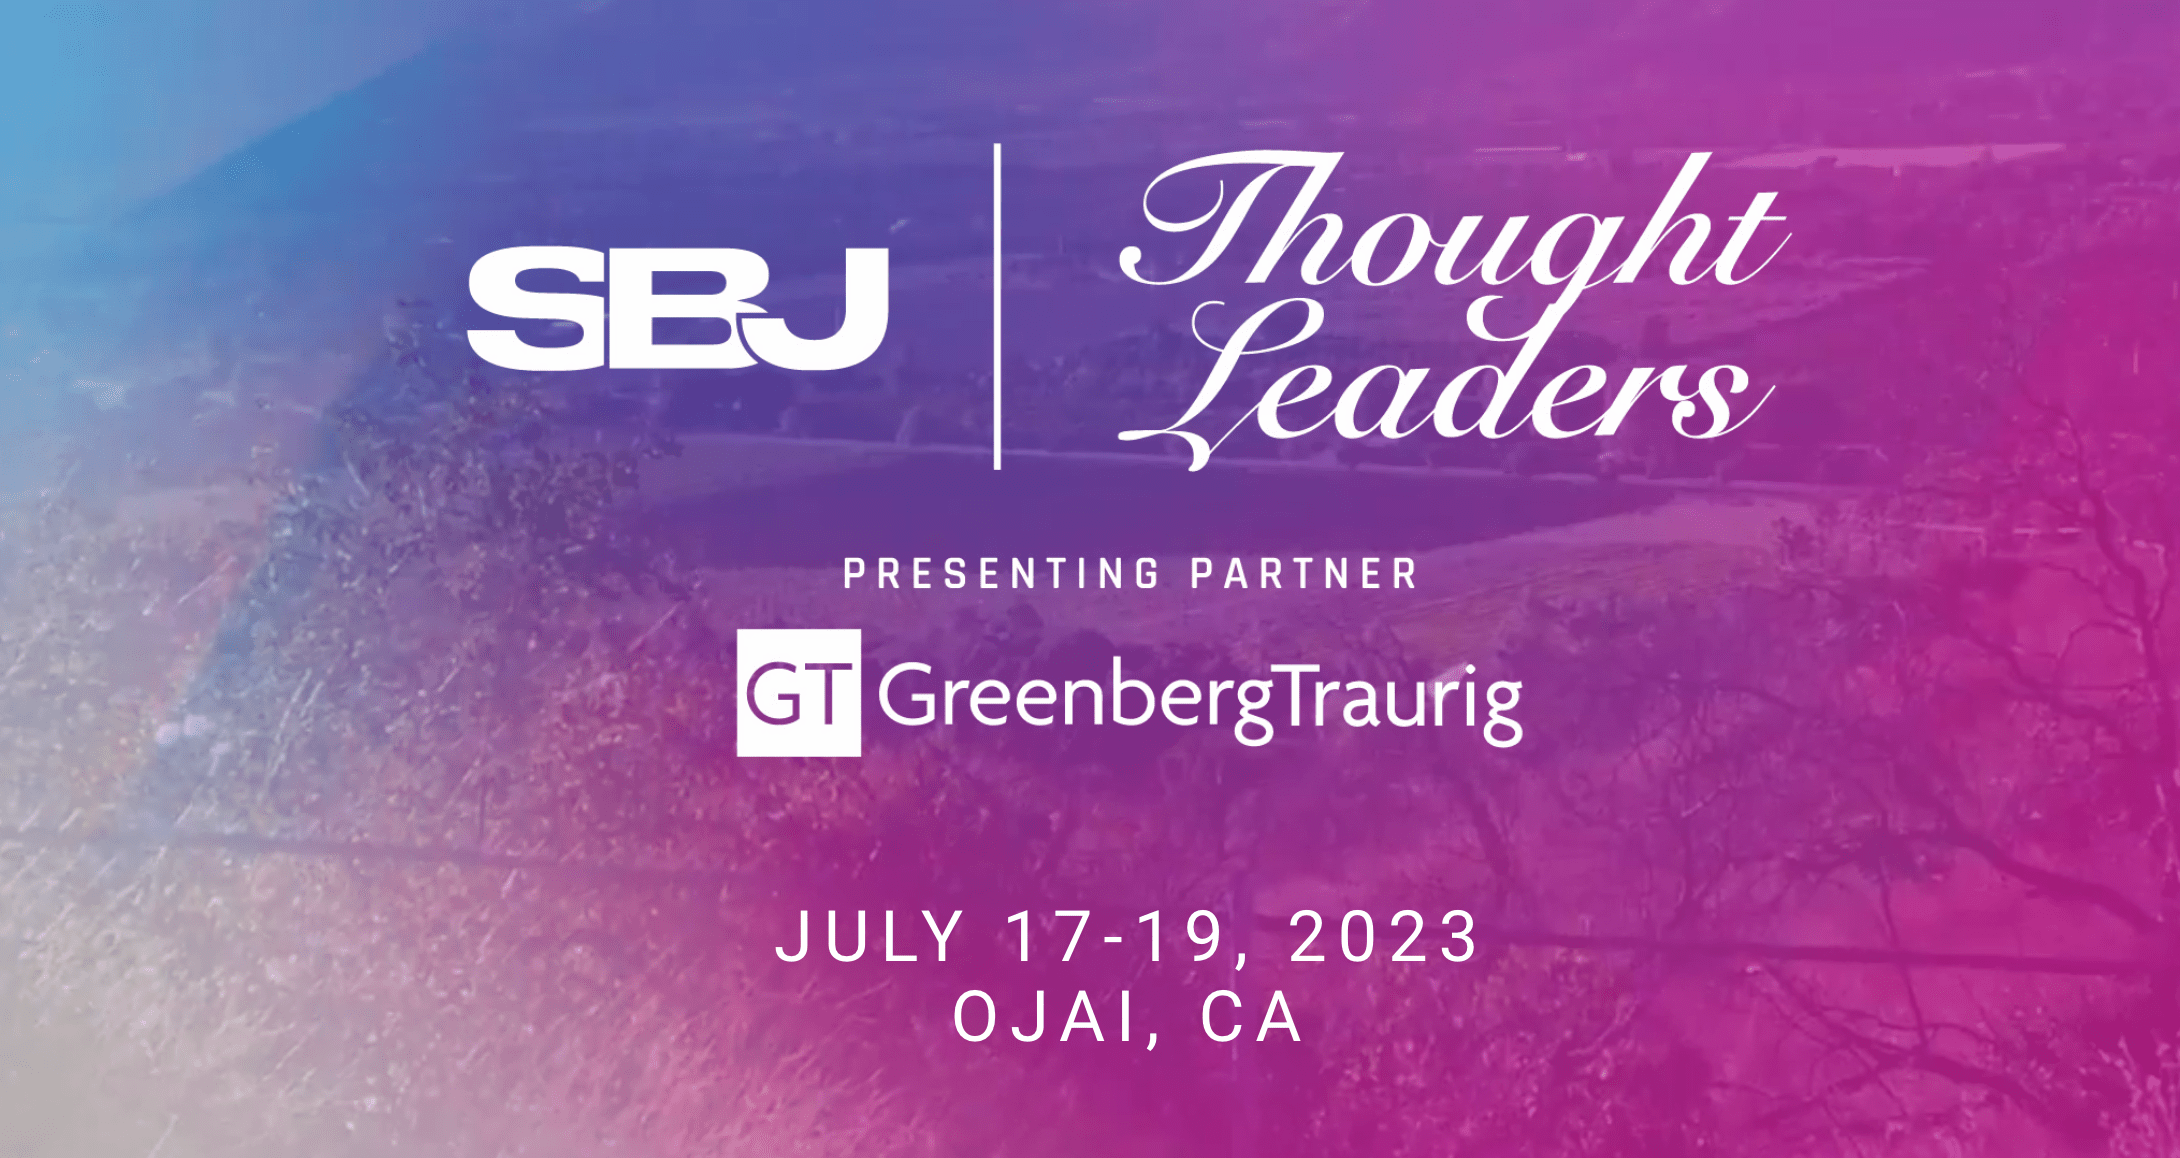 Thought Leaders event banner